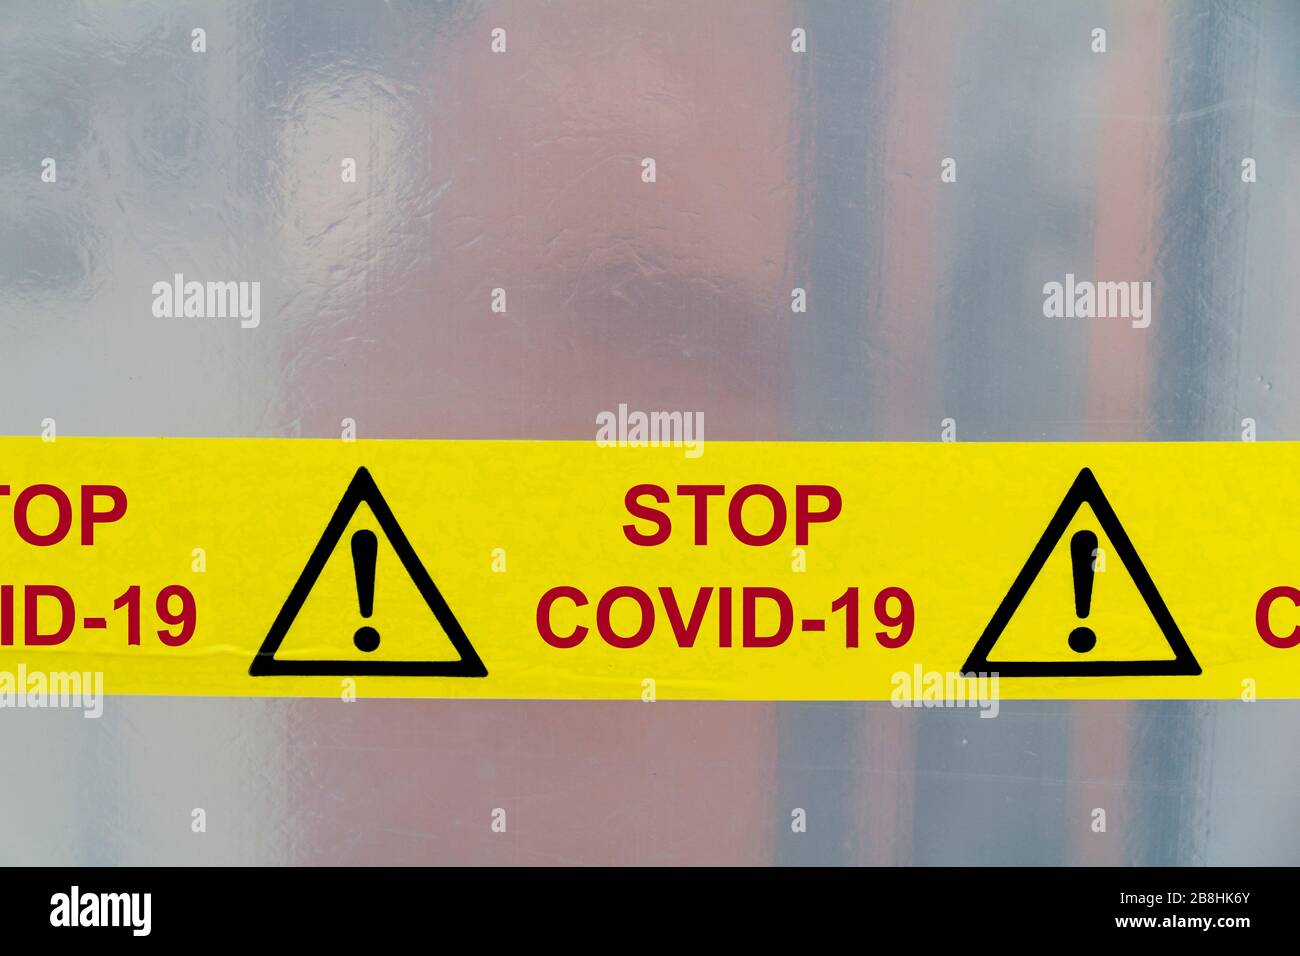 Danger Covid-19 warning tapes red on a yellow background Stock Photo